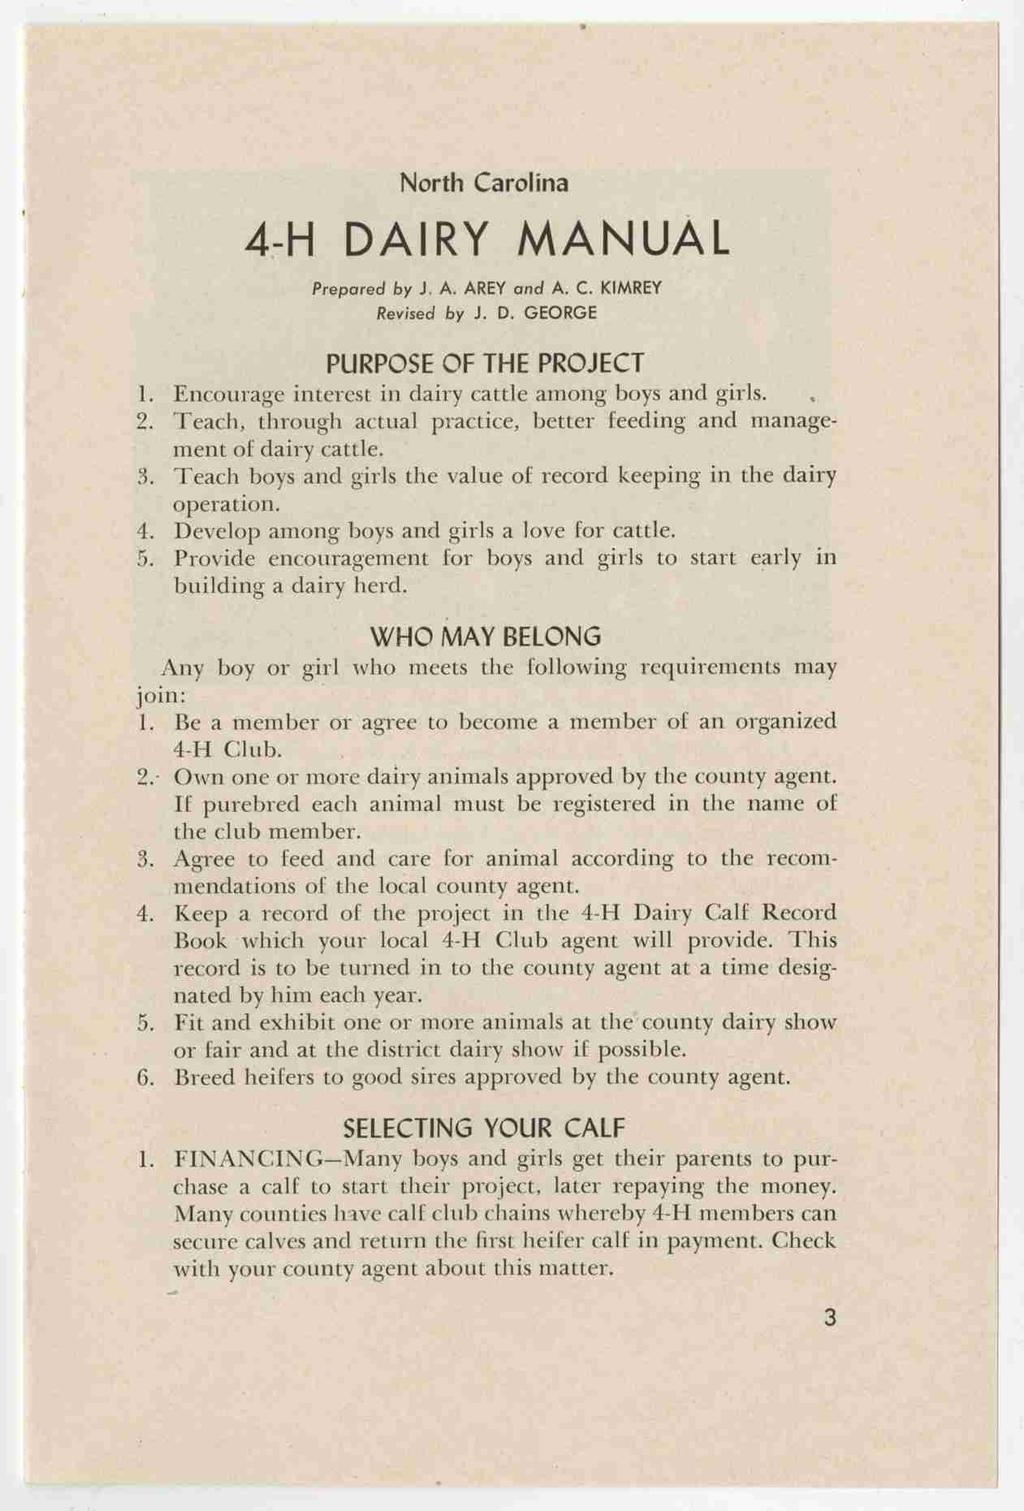 North Carolina 4-H DAIRY MANUAL Prepared by J. A. AREY and A. C. KIMREY Revised by J. D. GEORGE PURPOSE OF THE PROJECT 1. Encourage interest in dairy cattle among boys and girls.